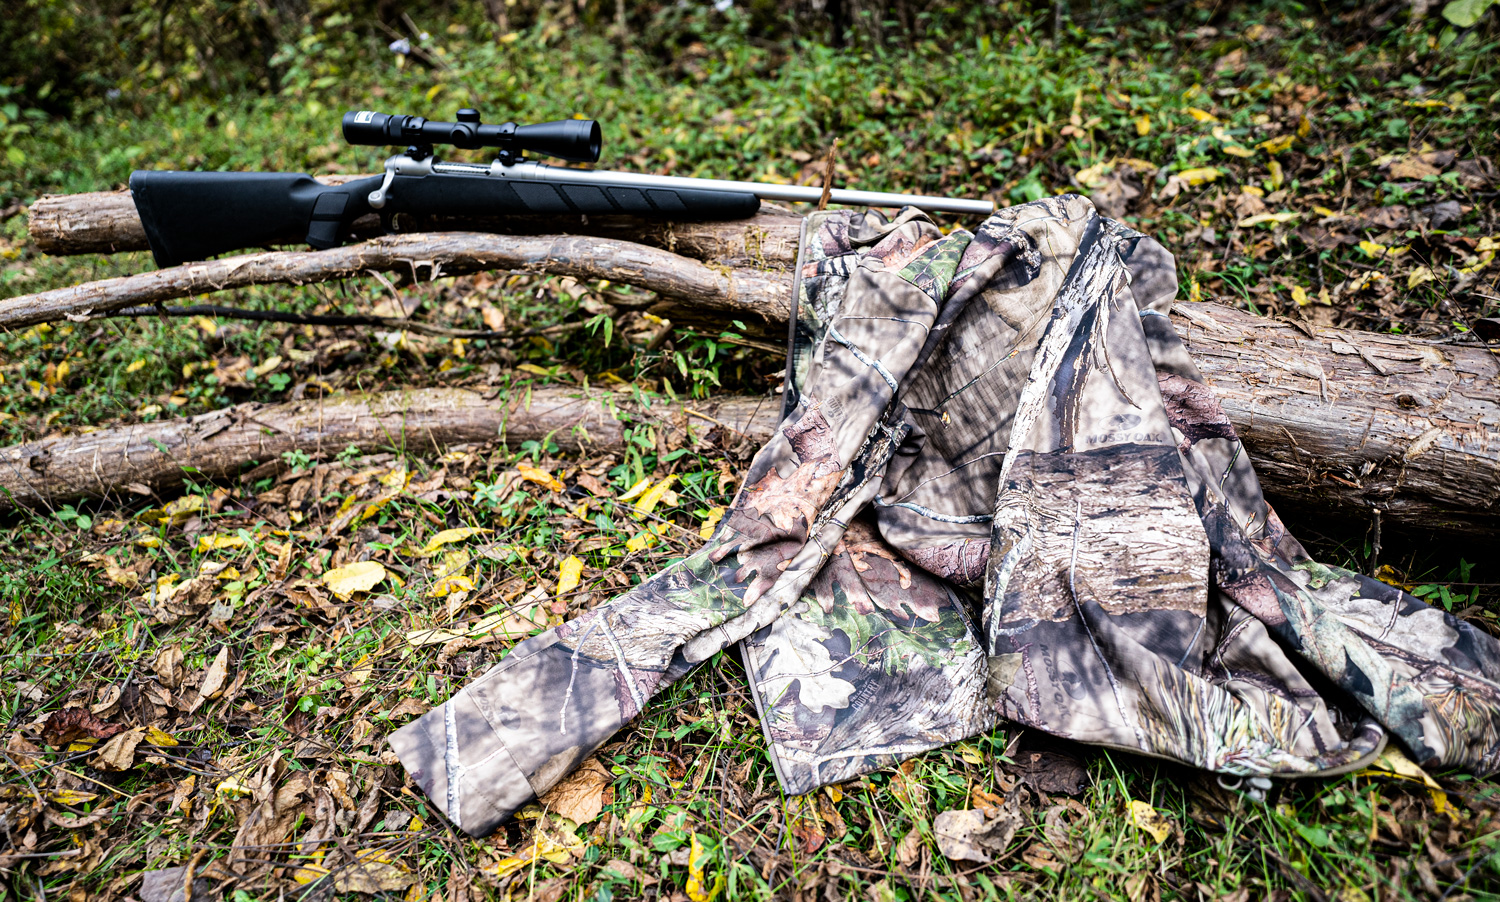 scent control hunting jacket and rifle in the woods